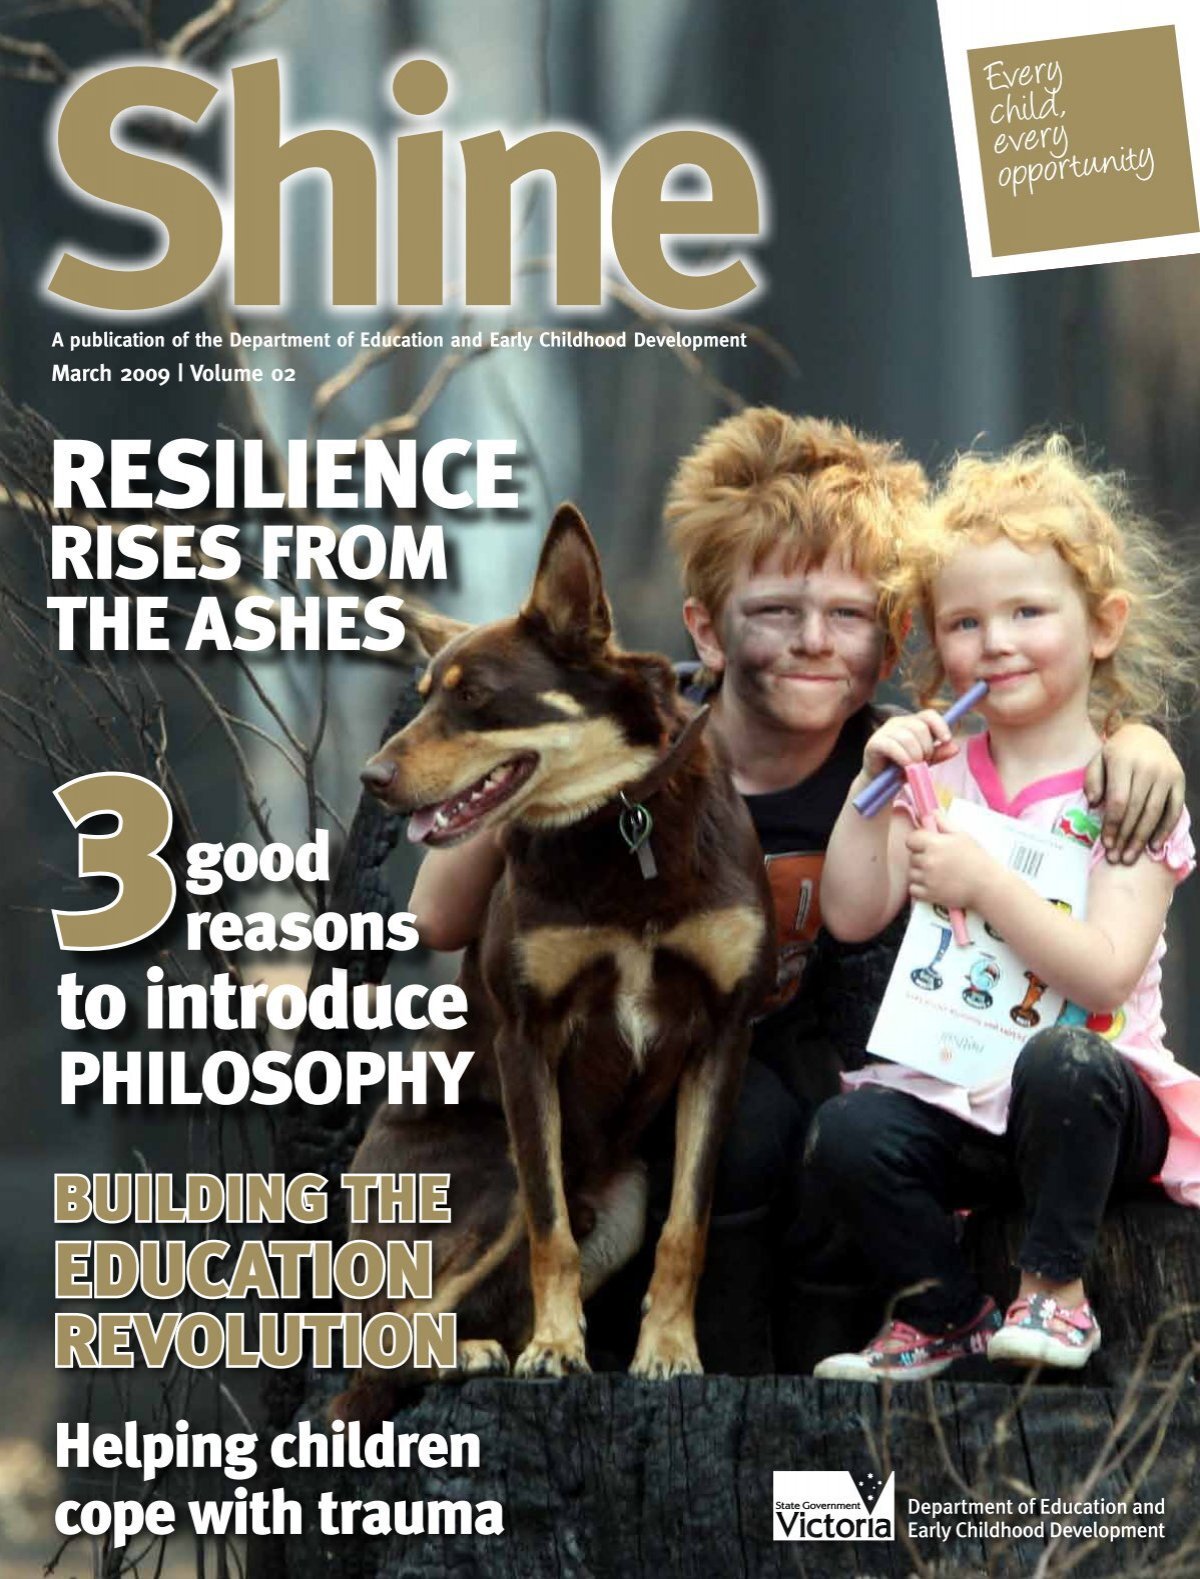 Shine, March 2009, Vol. 02 - Department of Education and Early